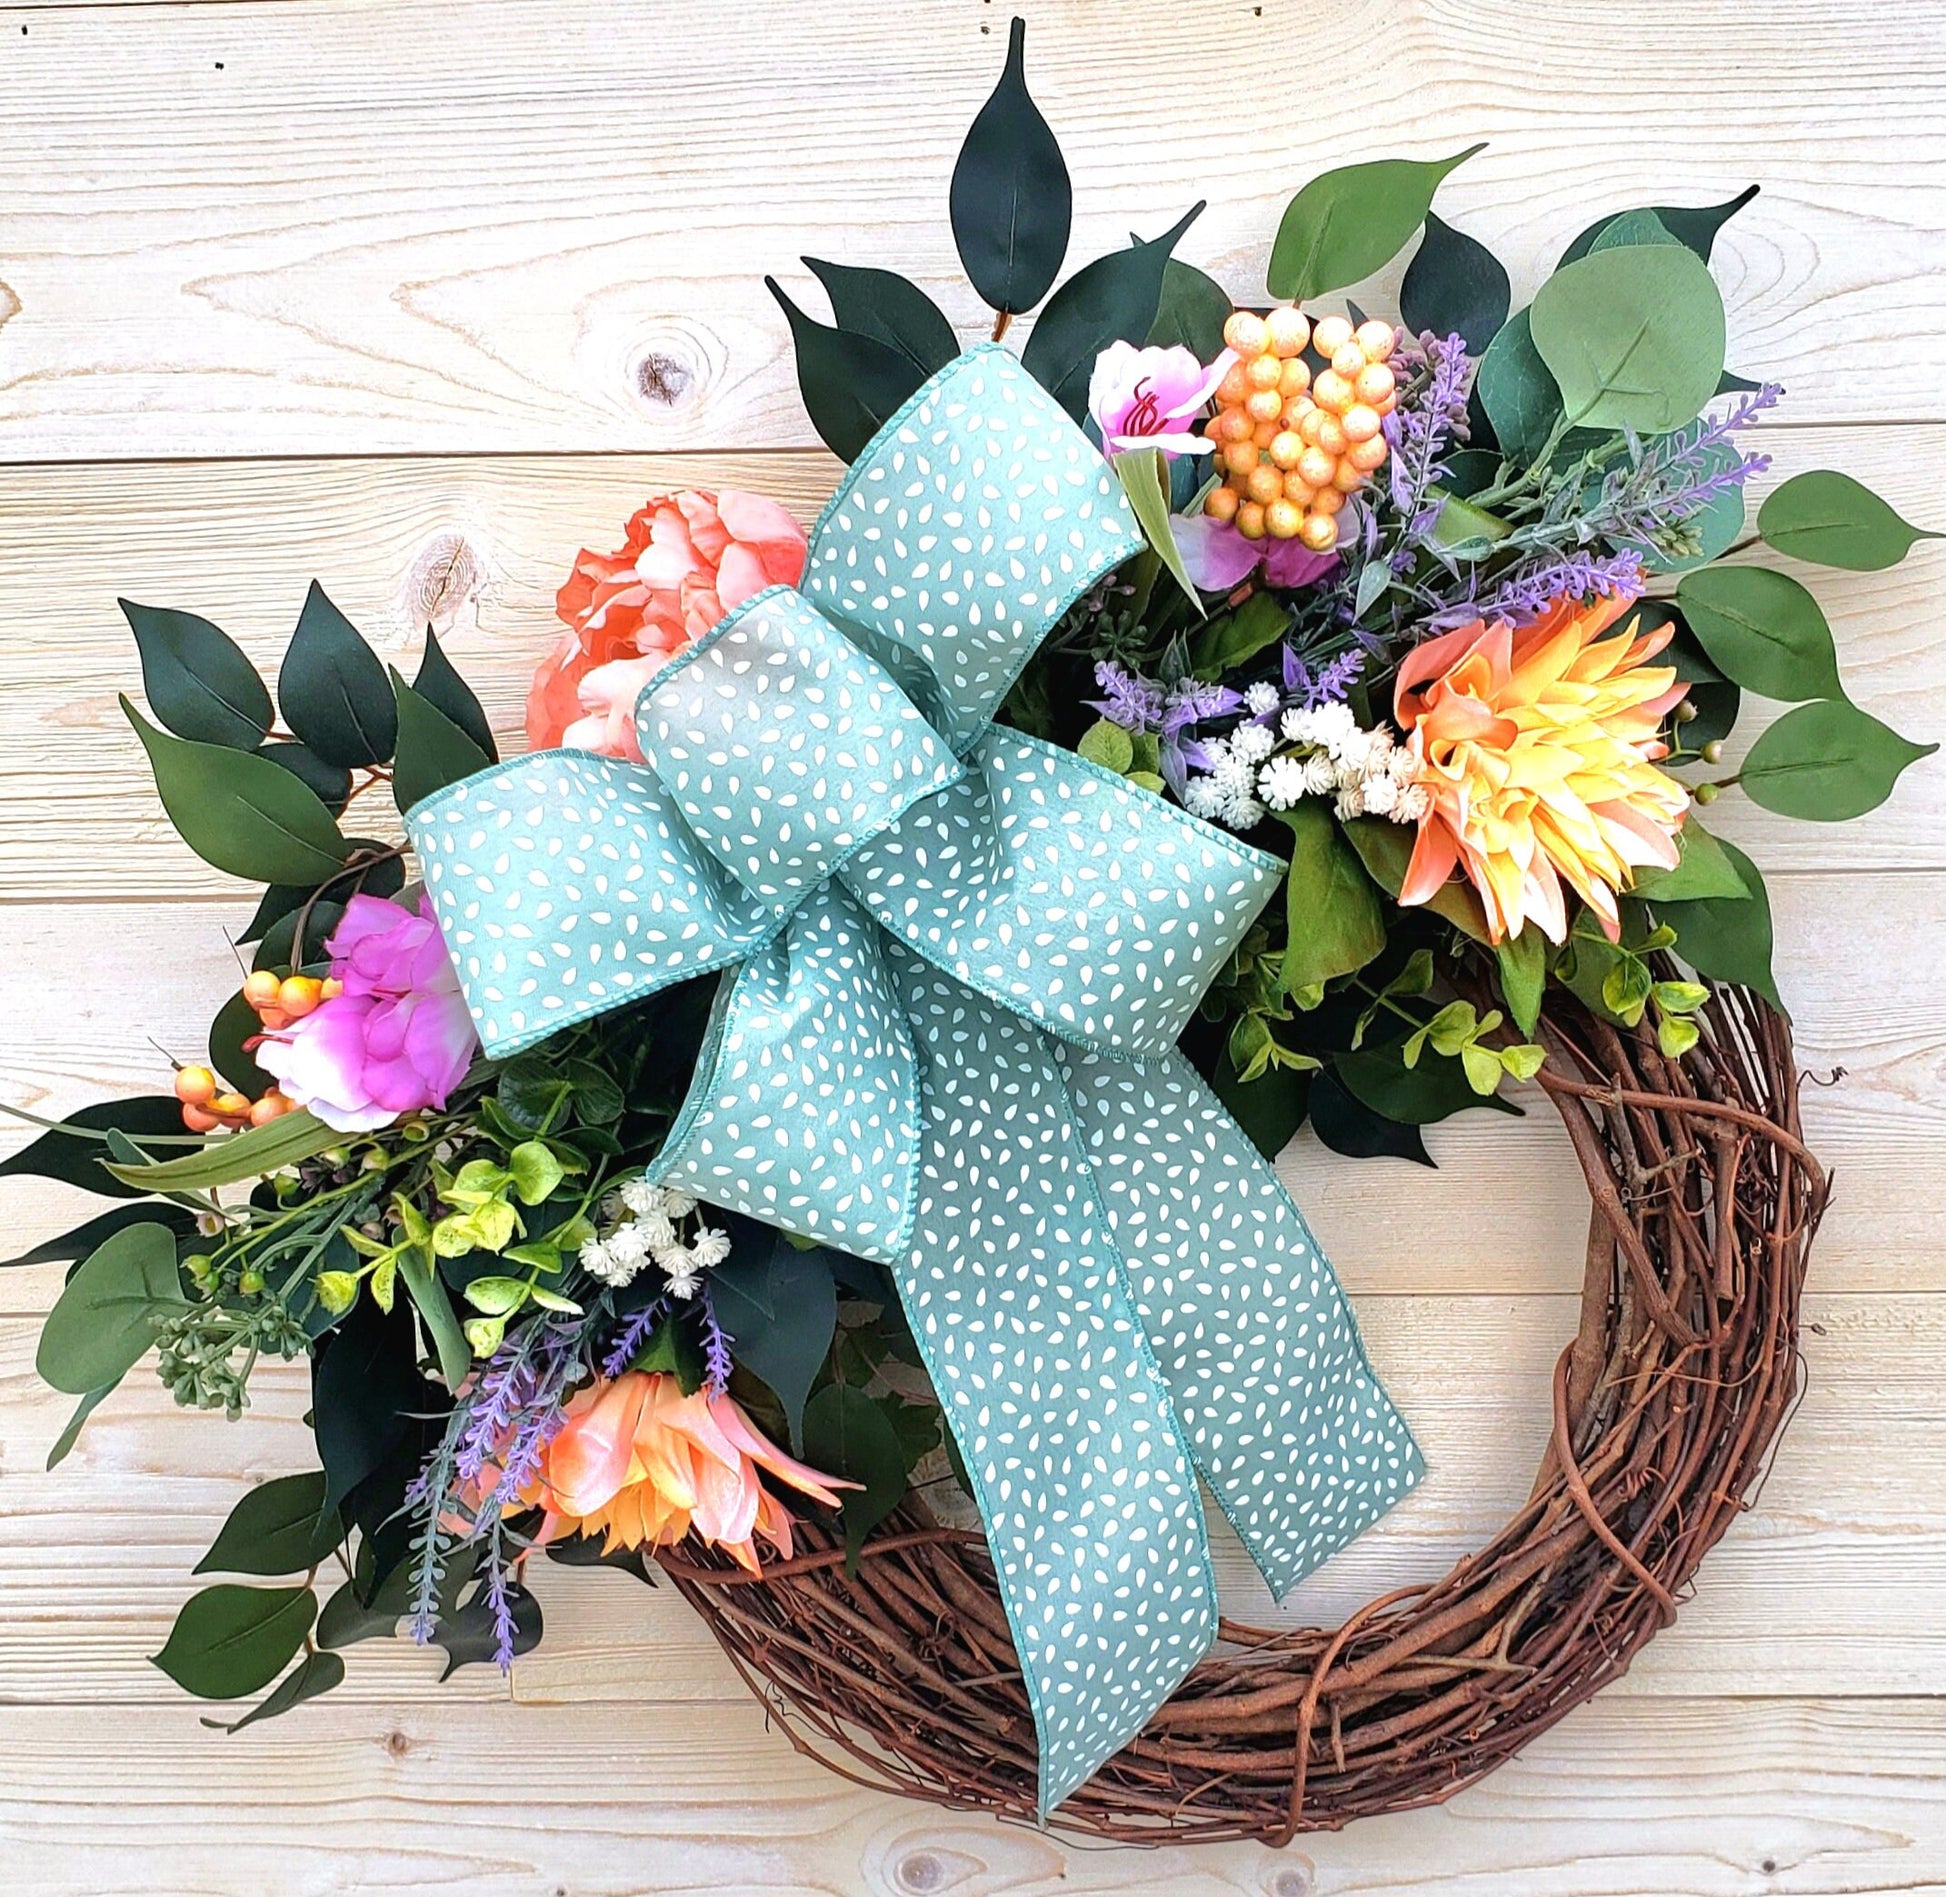 Farmhouse Style Year-Round Faux Floral Wreath with Elegant Blue Bow, front view.